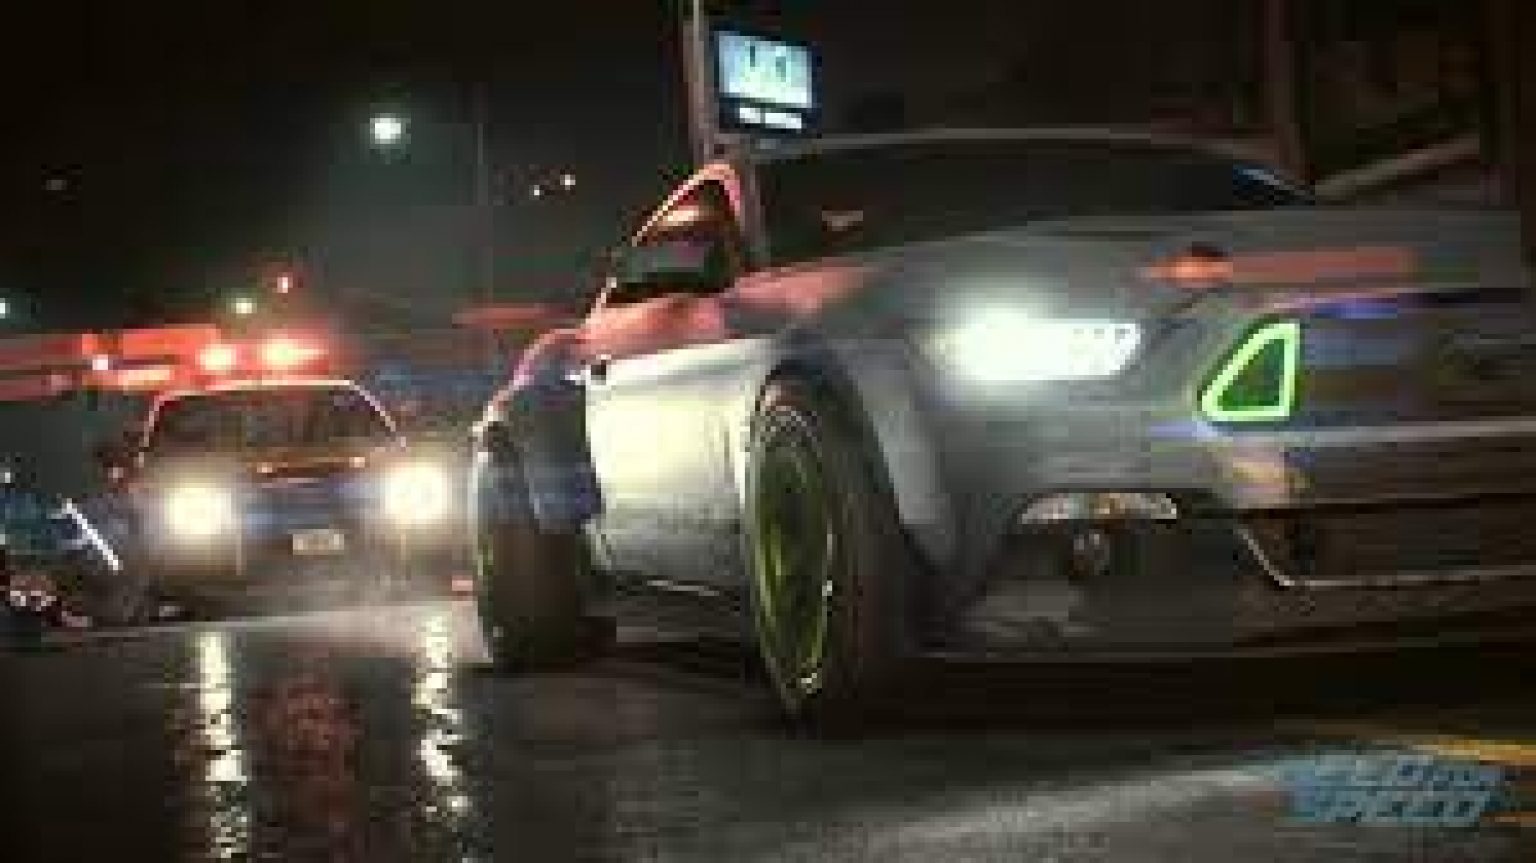 need for speed 2015 pc torrent download